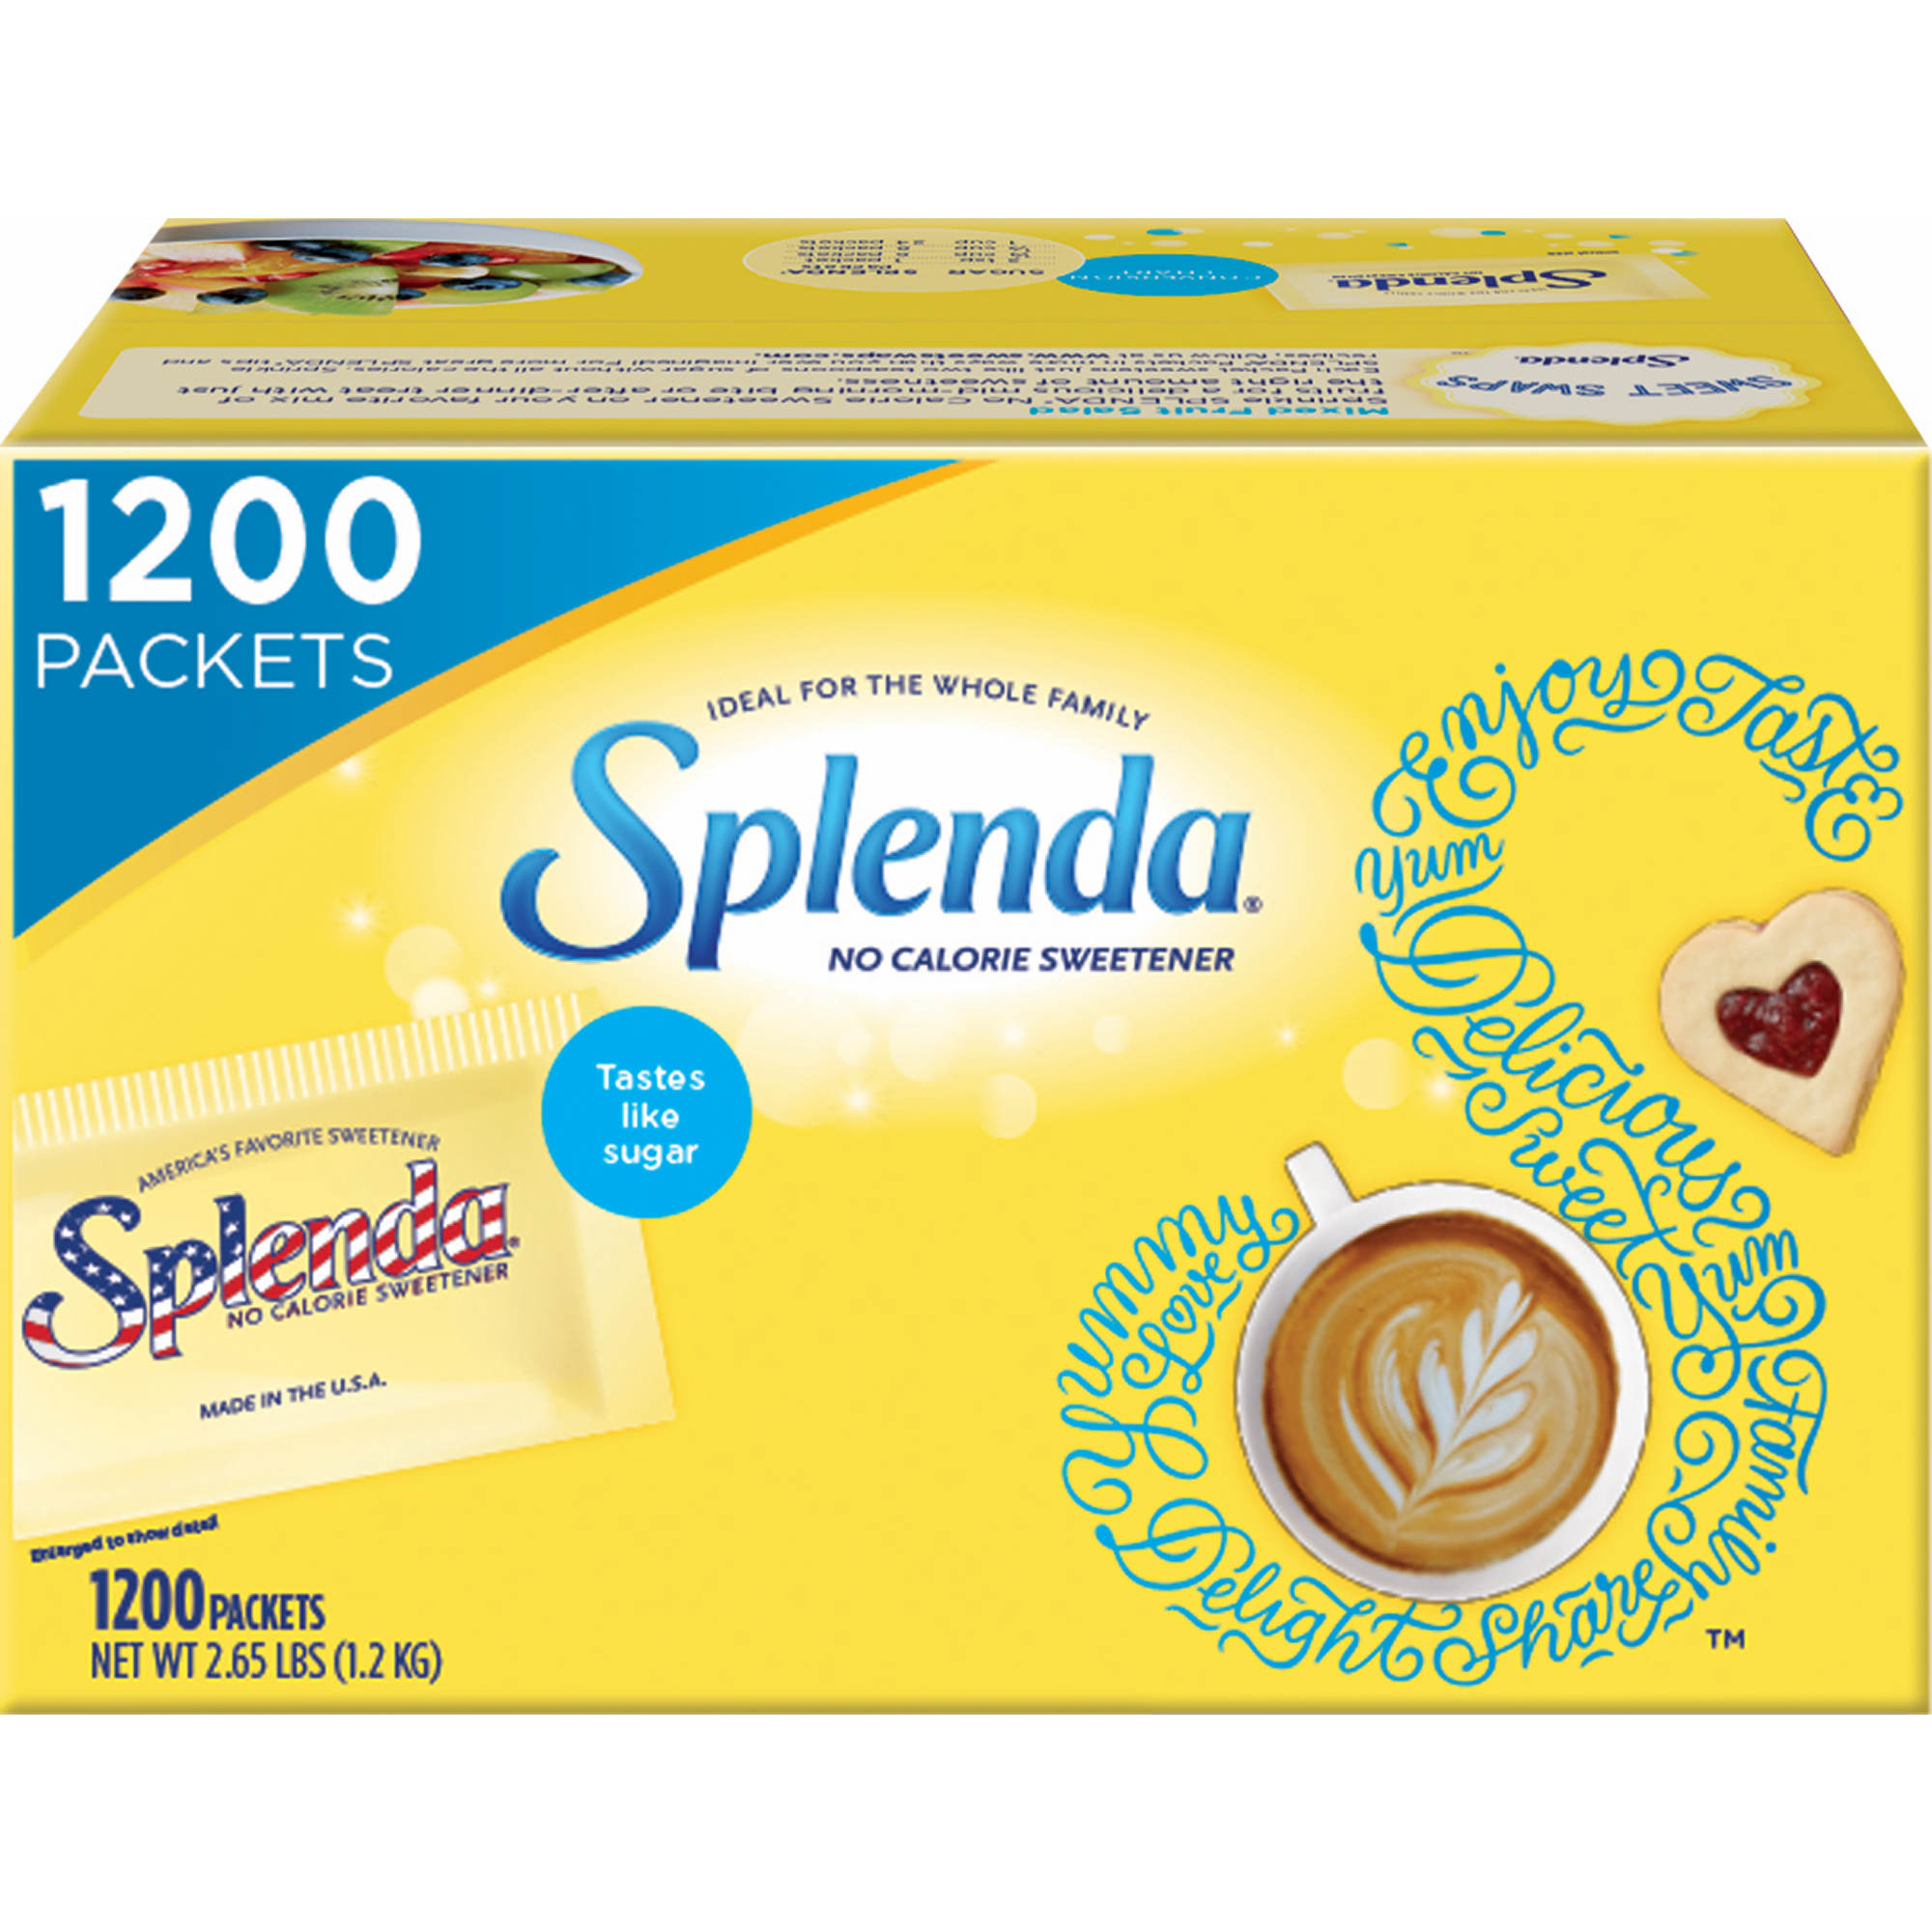 How many Splenda packets equal 1 cup of sugar?